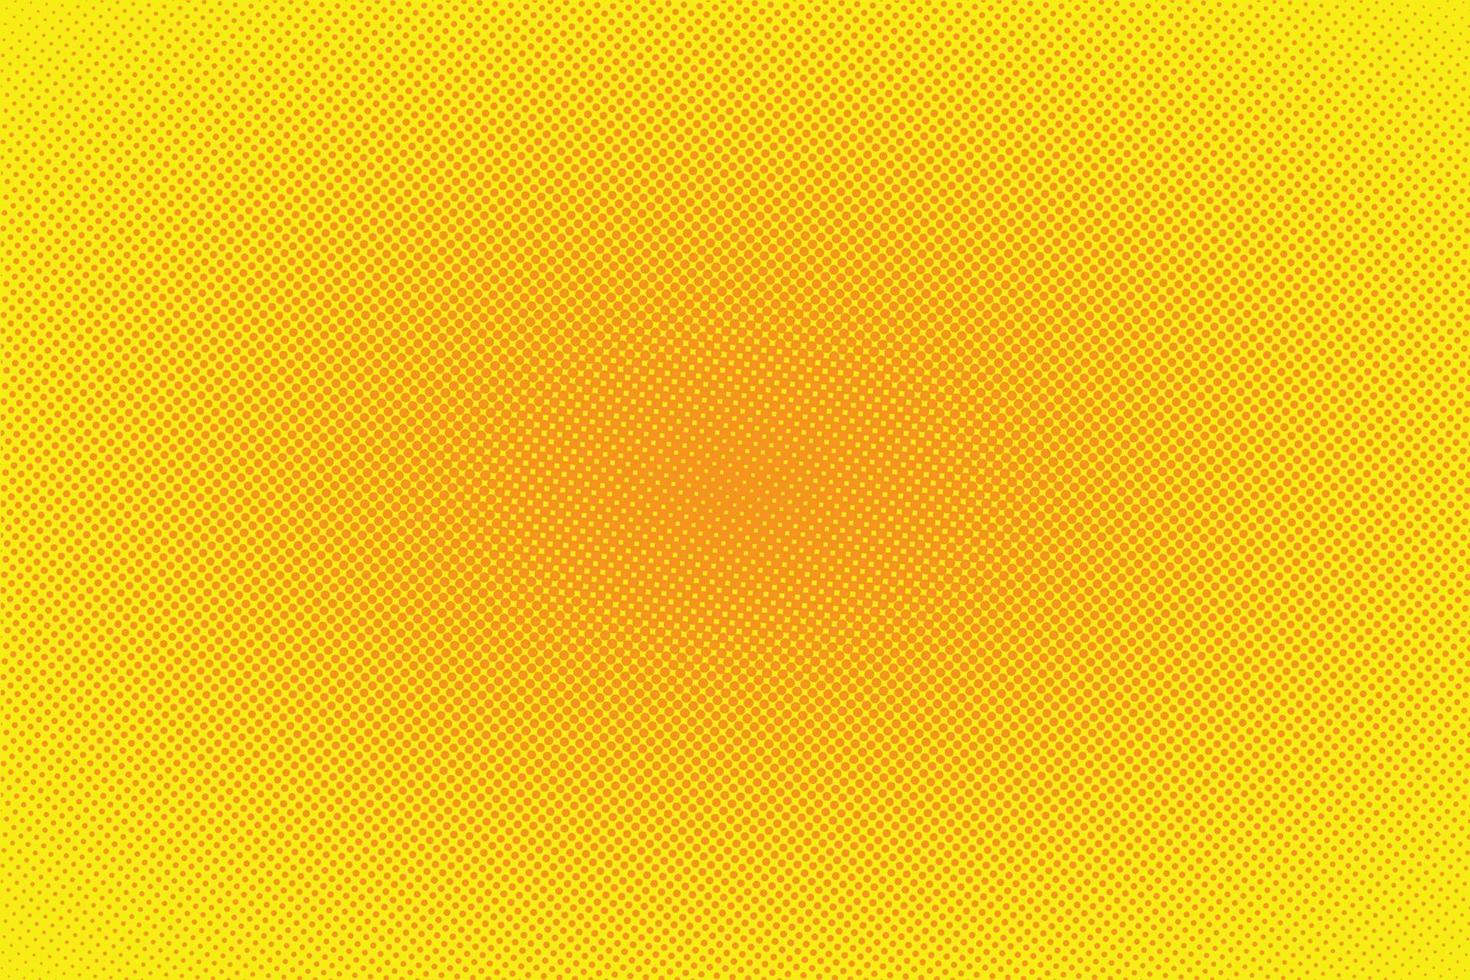 Bright sun rays with yellow dots vector